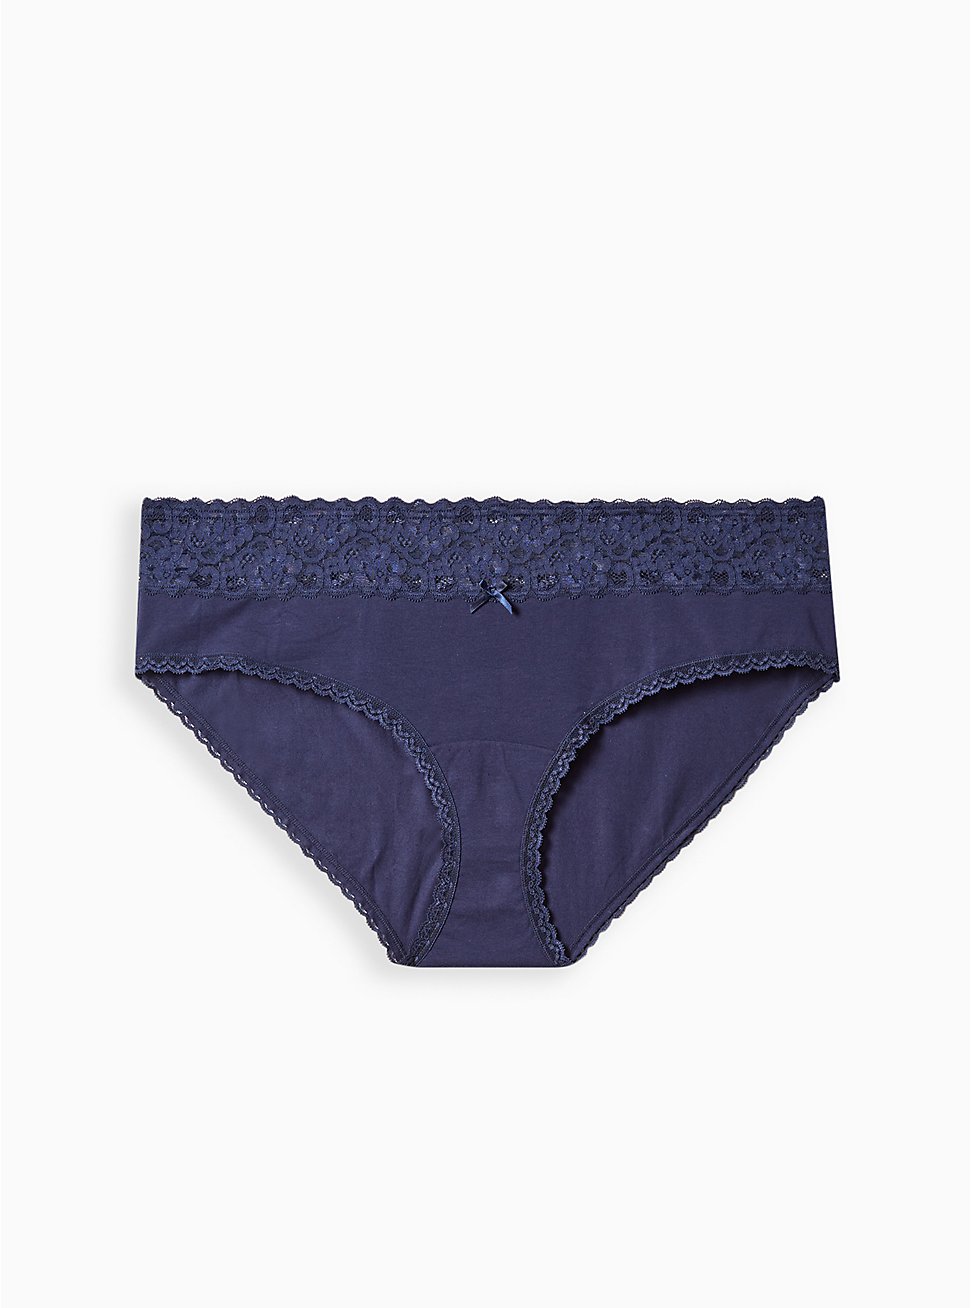 Cotton Mid-Rise Hipster Lace Trim Panty, PEACOAT, hi-res